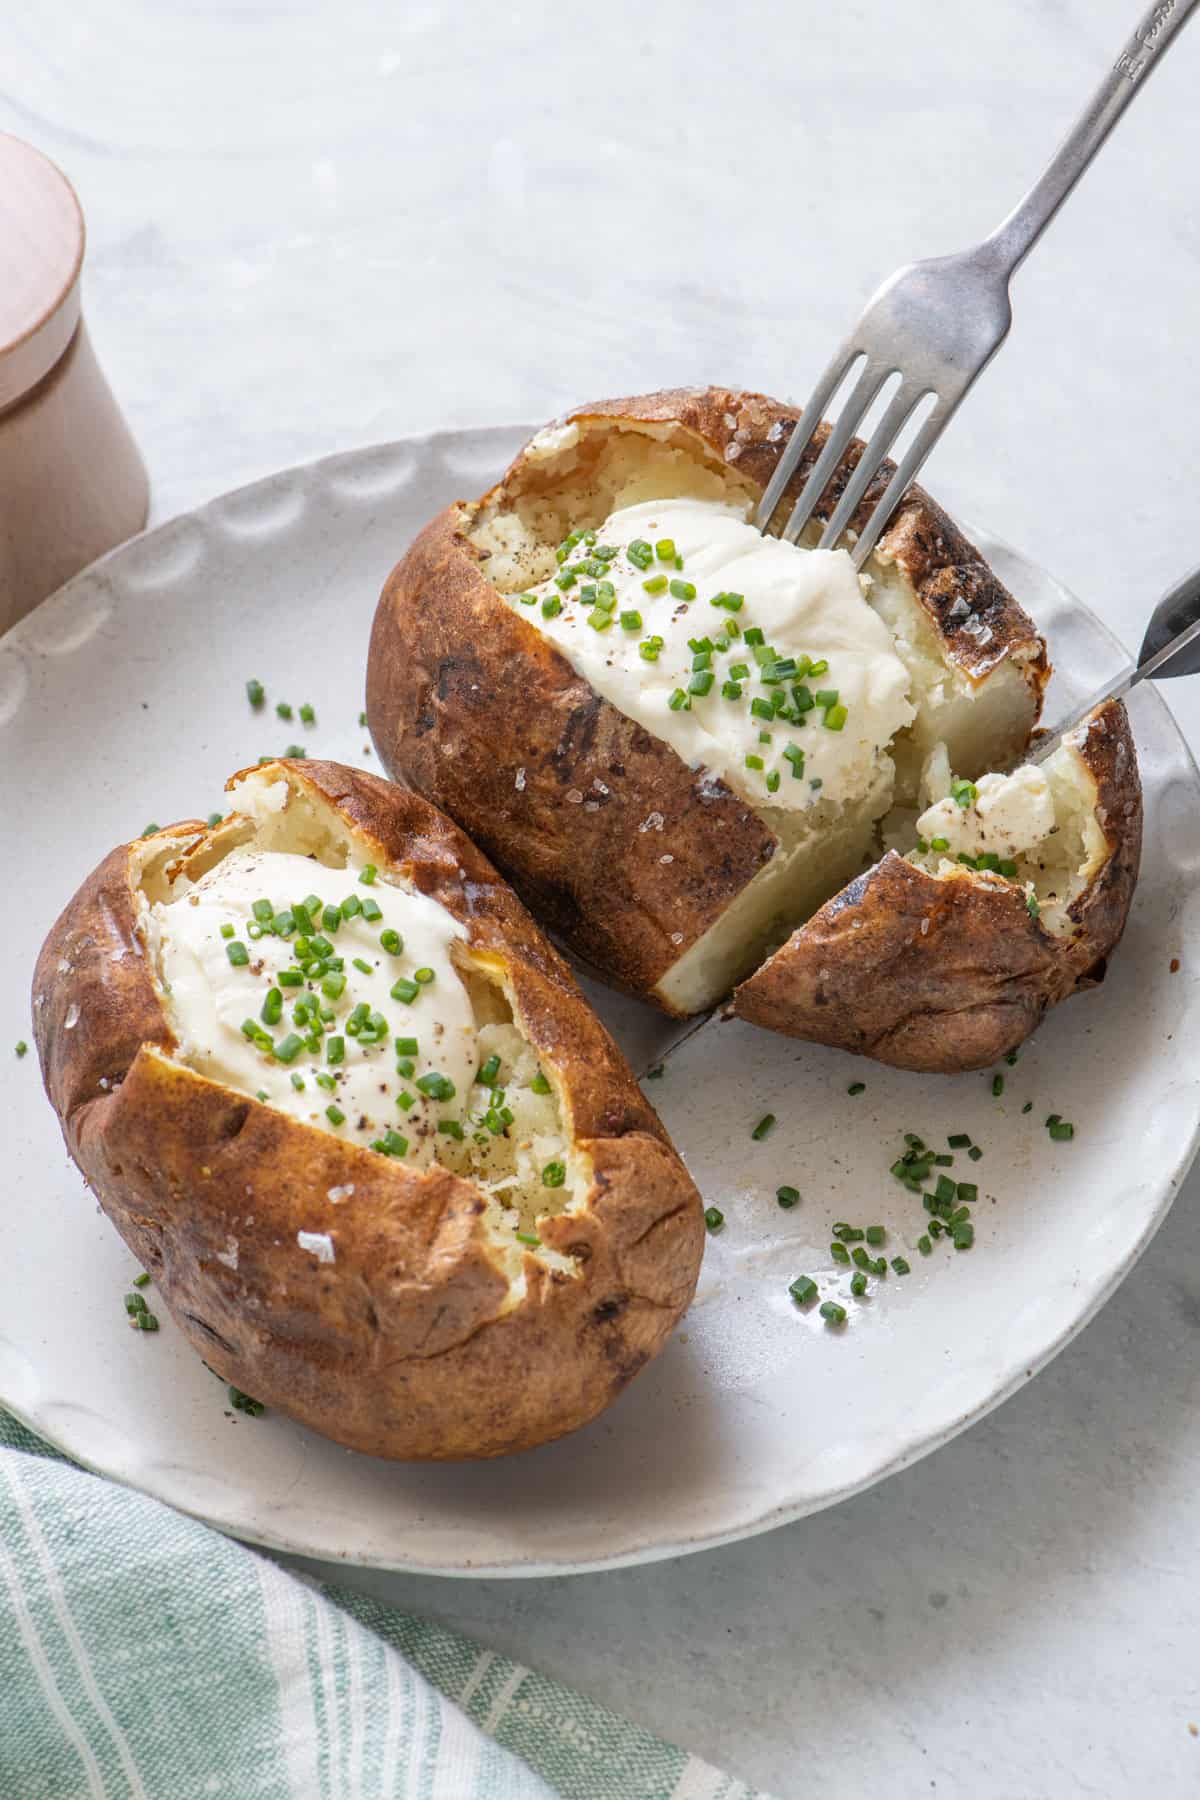 Two baked potatoes on plate topped with sour cream and chopped chives, cutting into one of them with knife and fork.